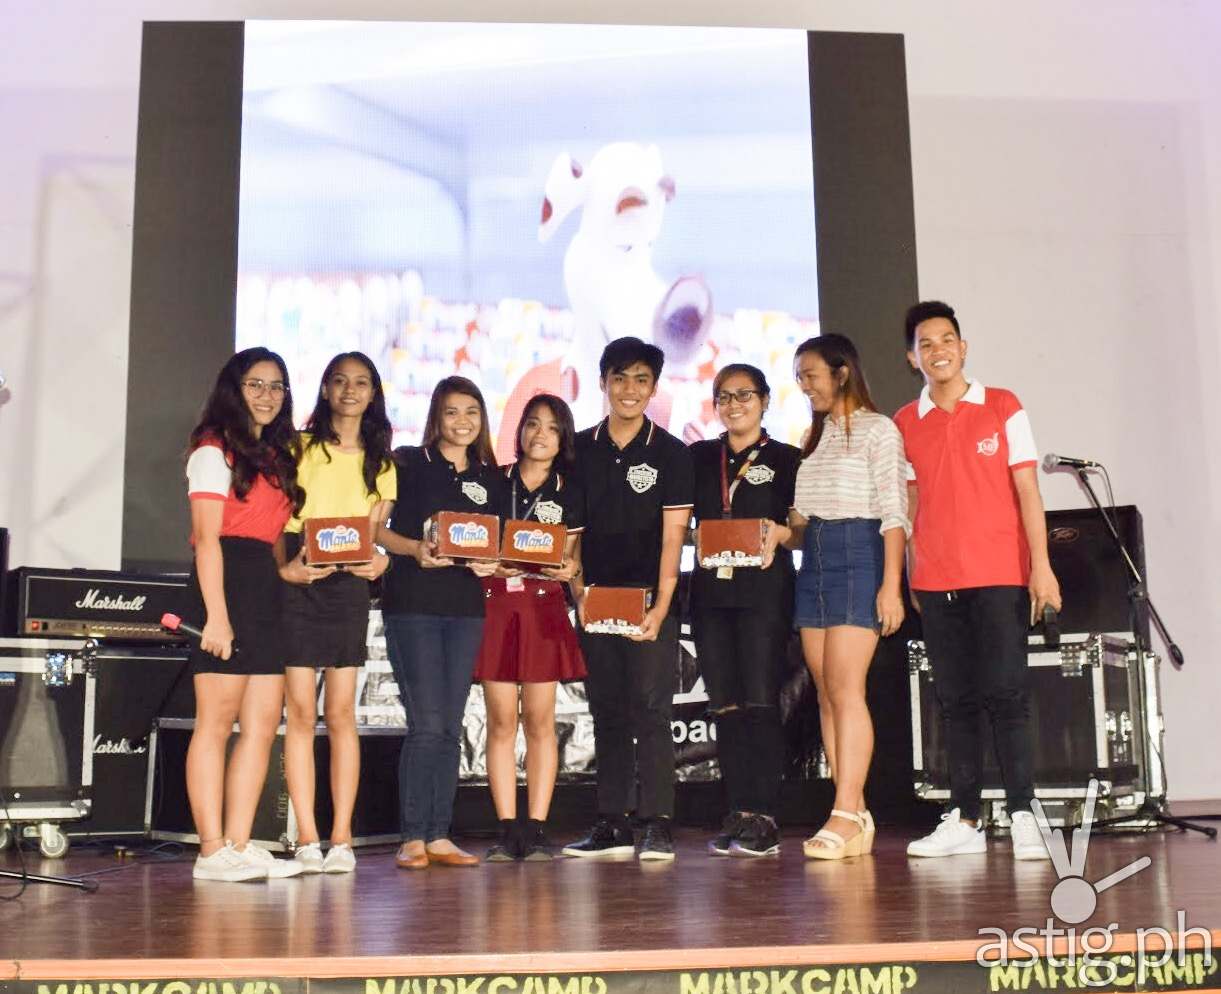 PUP holds marketing event for students | ASTIG.PH